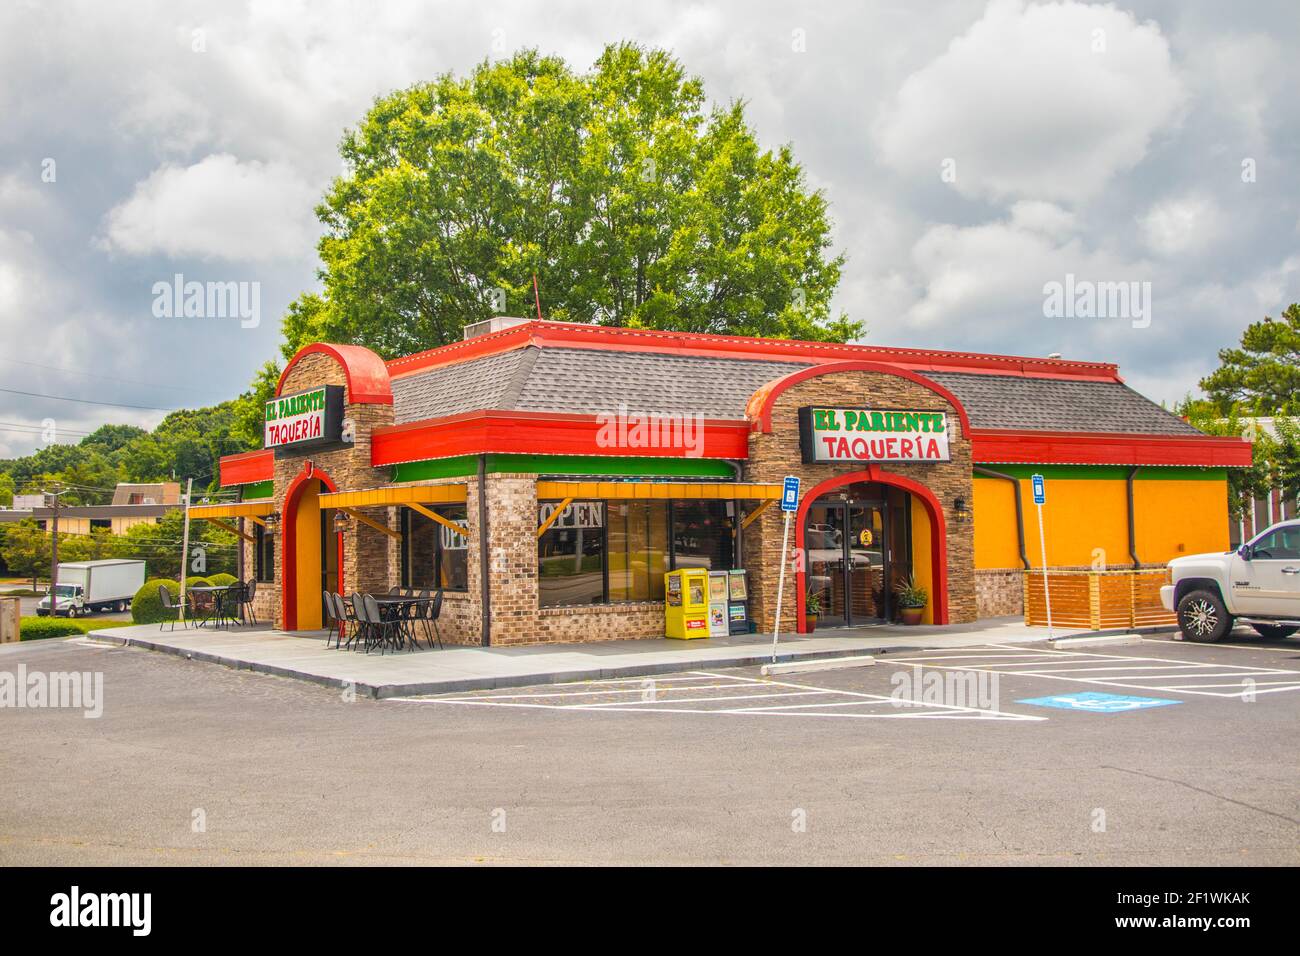 Doraville, Ga / USA - 07 06 20: Ethnic restaurant with a large green tree and cloudy sky Stock Photo